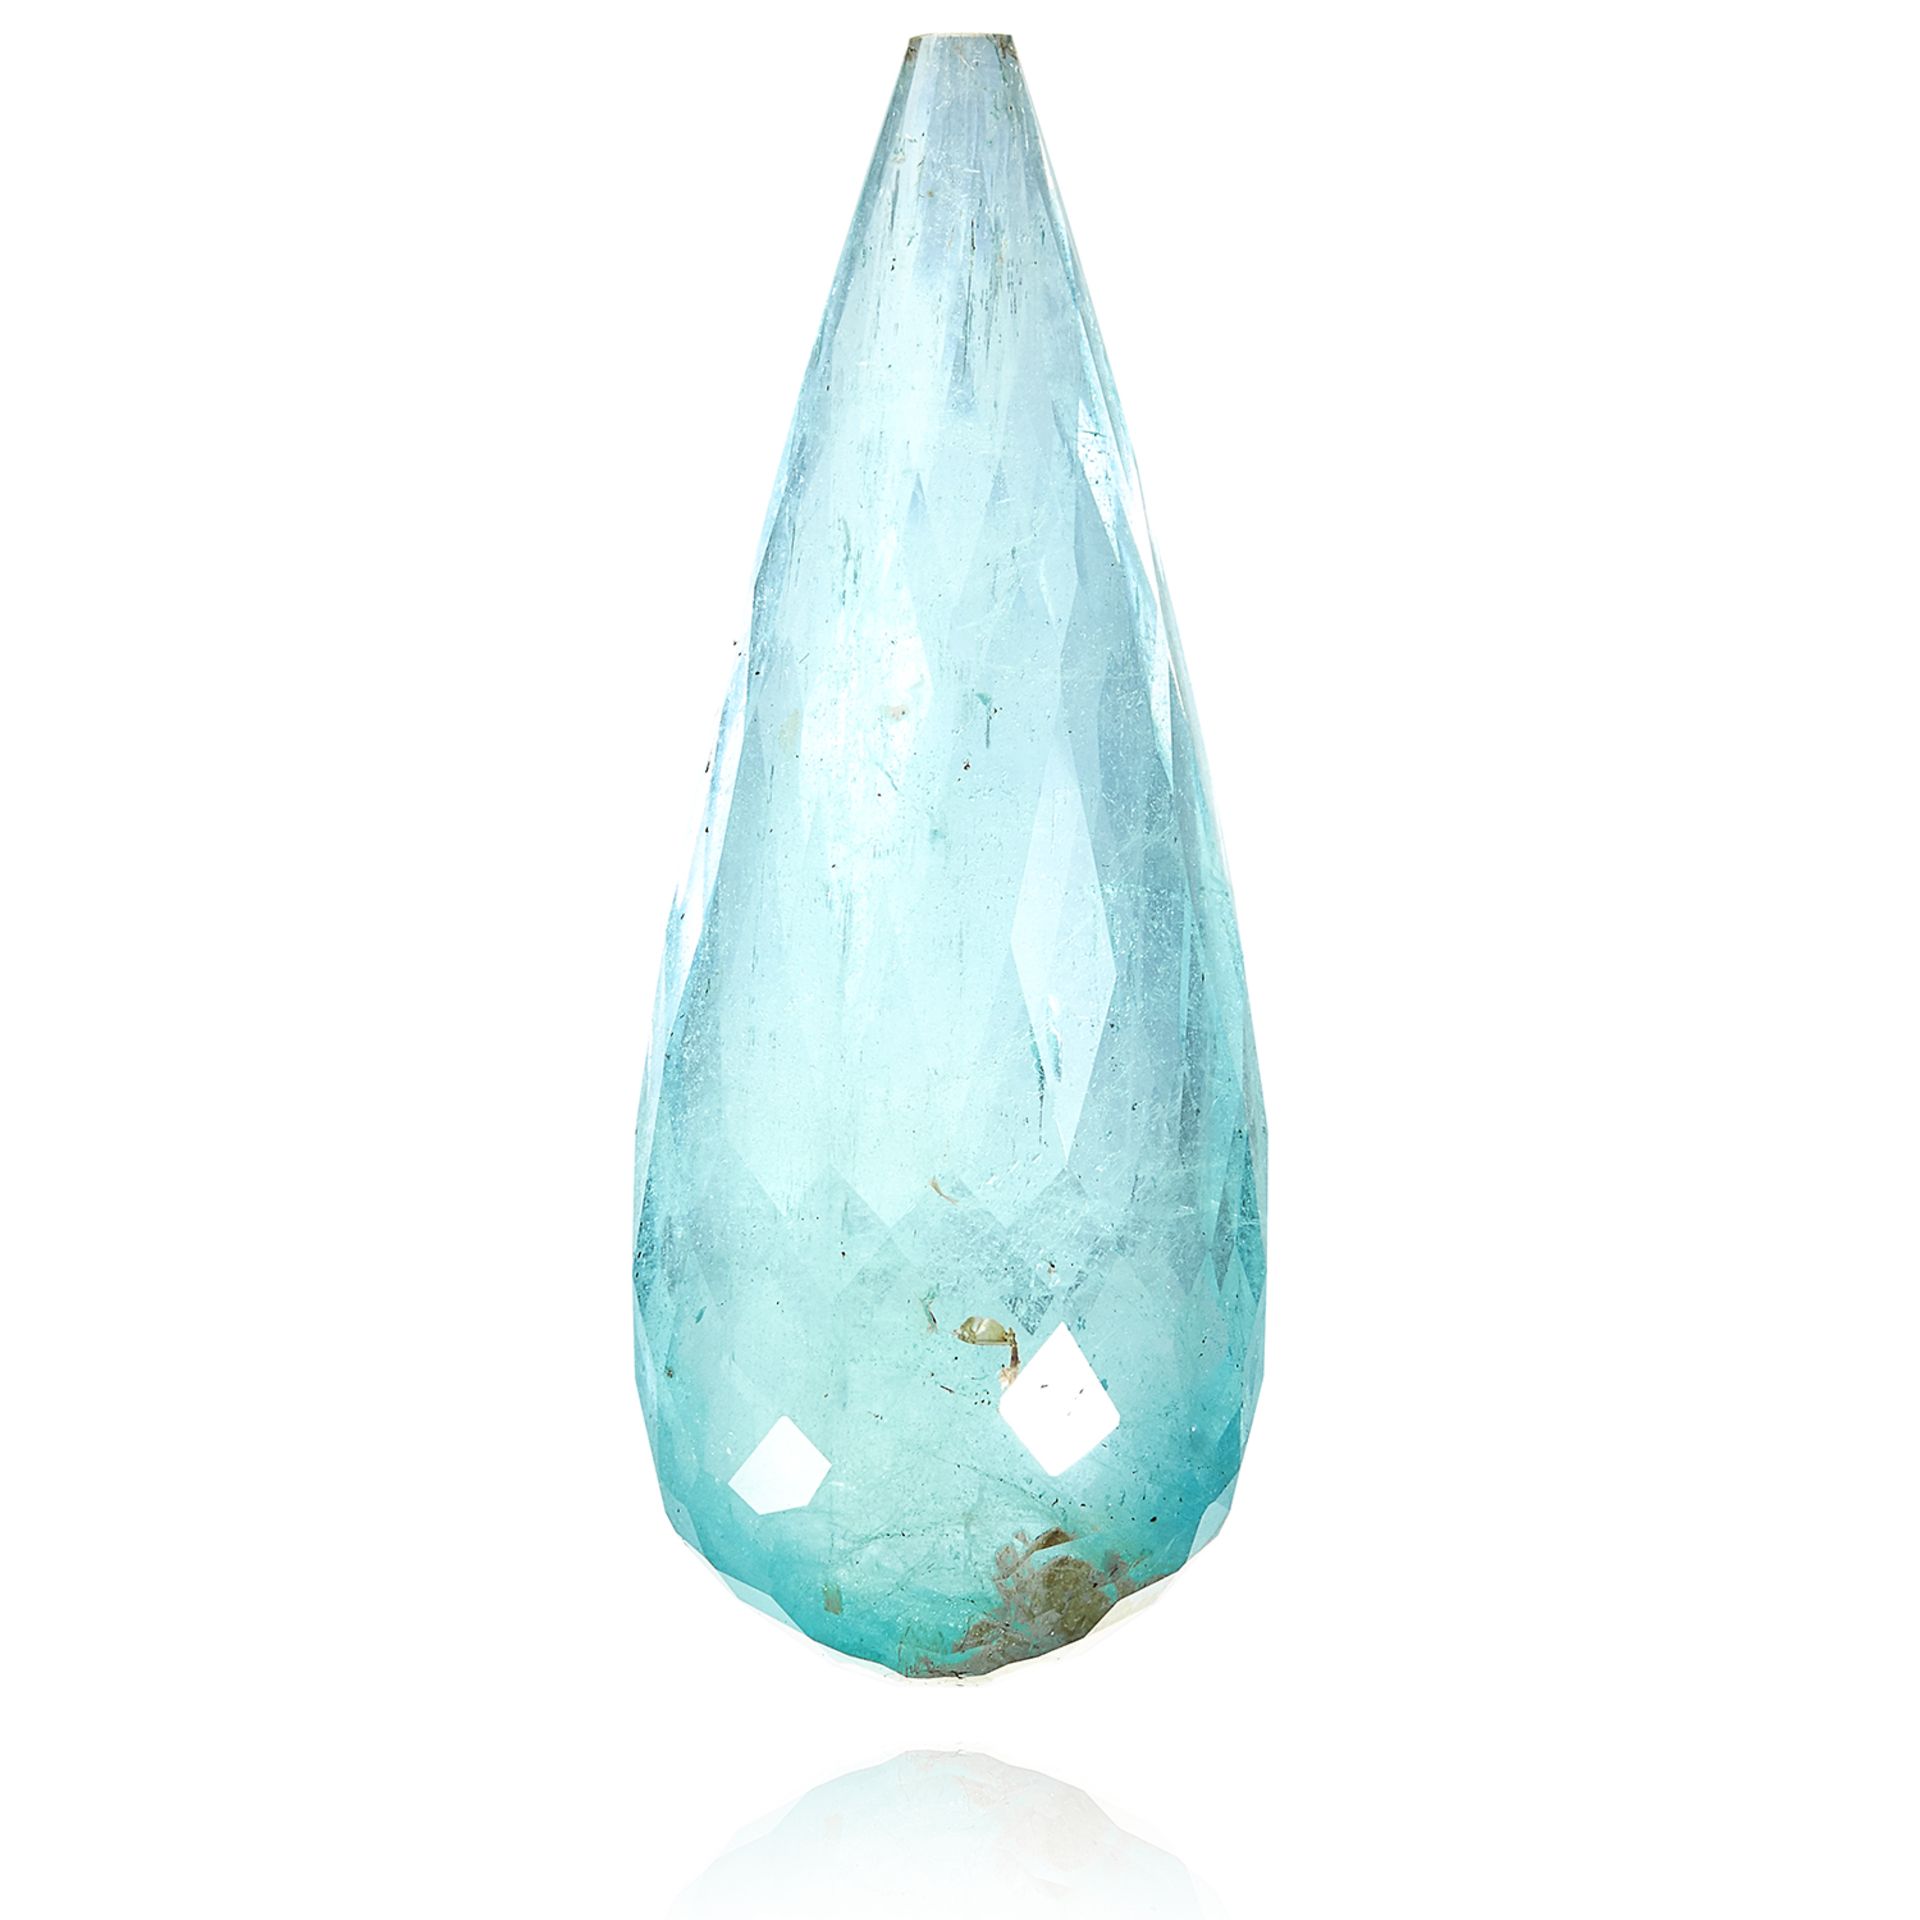 A LARGE FACETED AQUAMARINE JEWEL briolette cut, of approximately 300 carats.